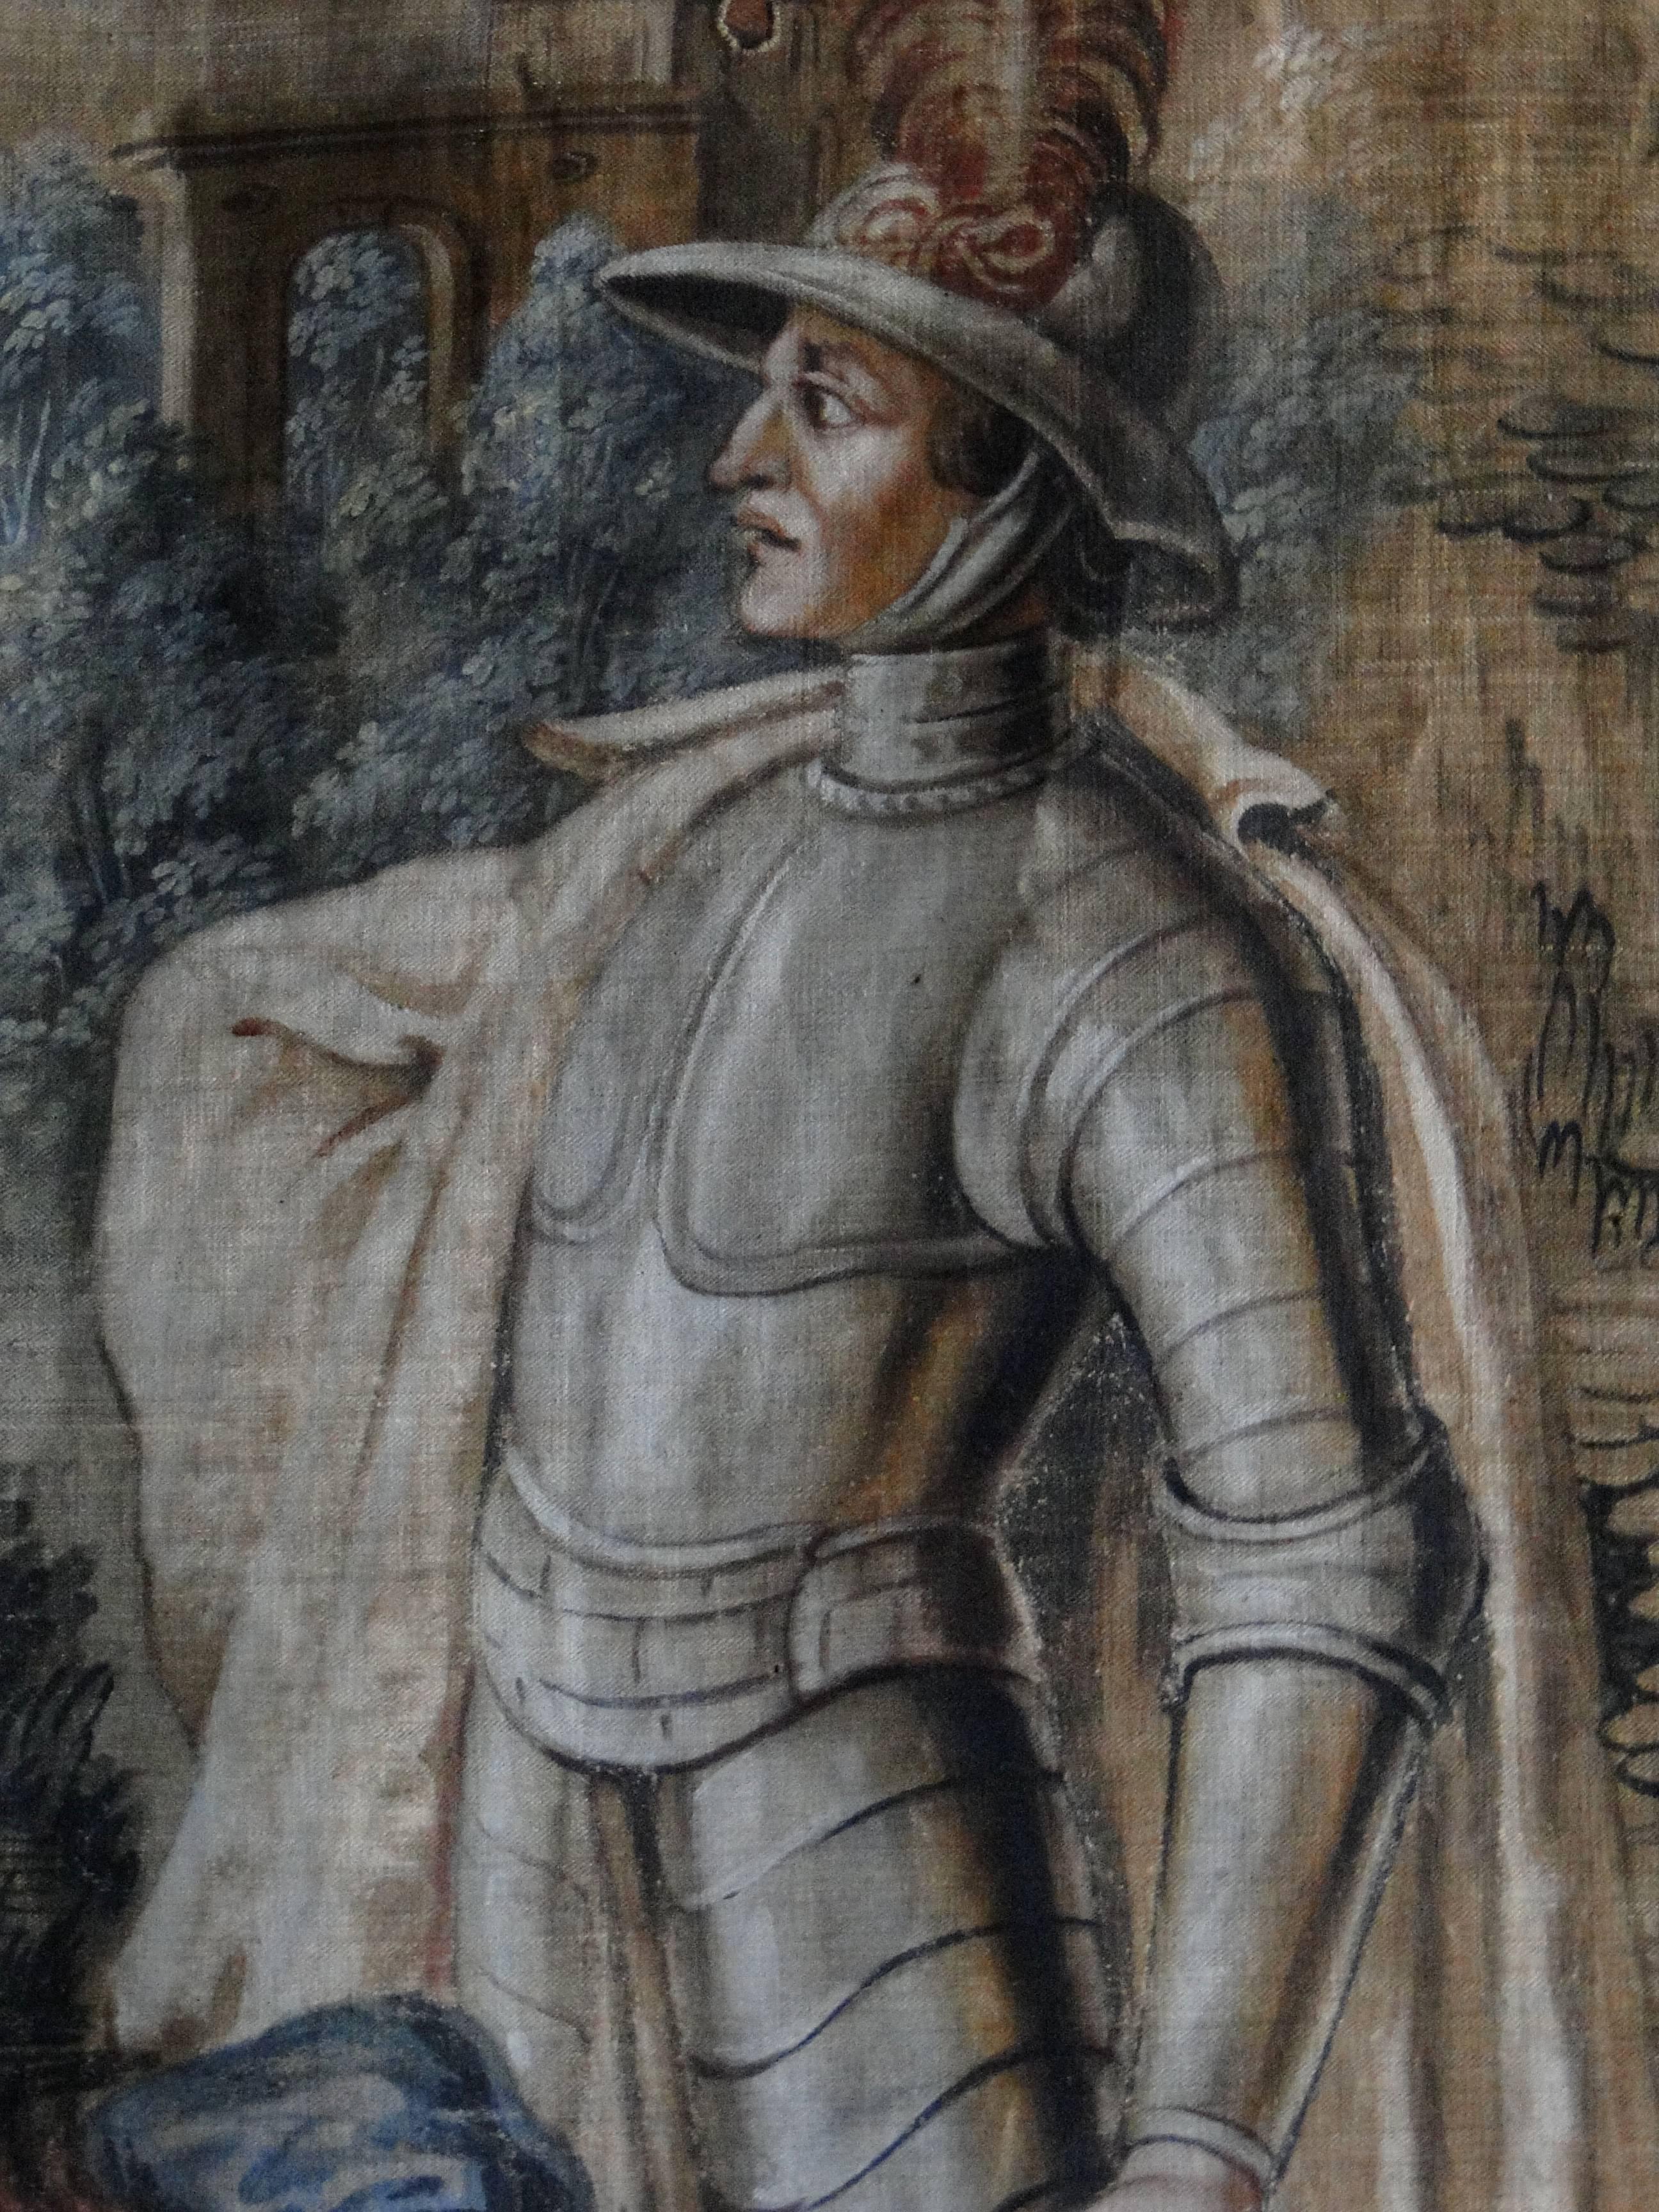 18th century painted canvas , carton or model for Tapisserie. French school. Knight in armor with servant in landscape. Not framed. Measures: Width 145 cm, height 265. Restorations, but beautiful and rare piece!